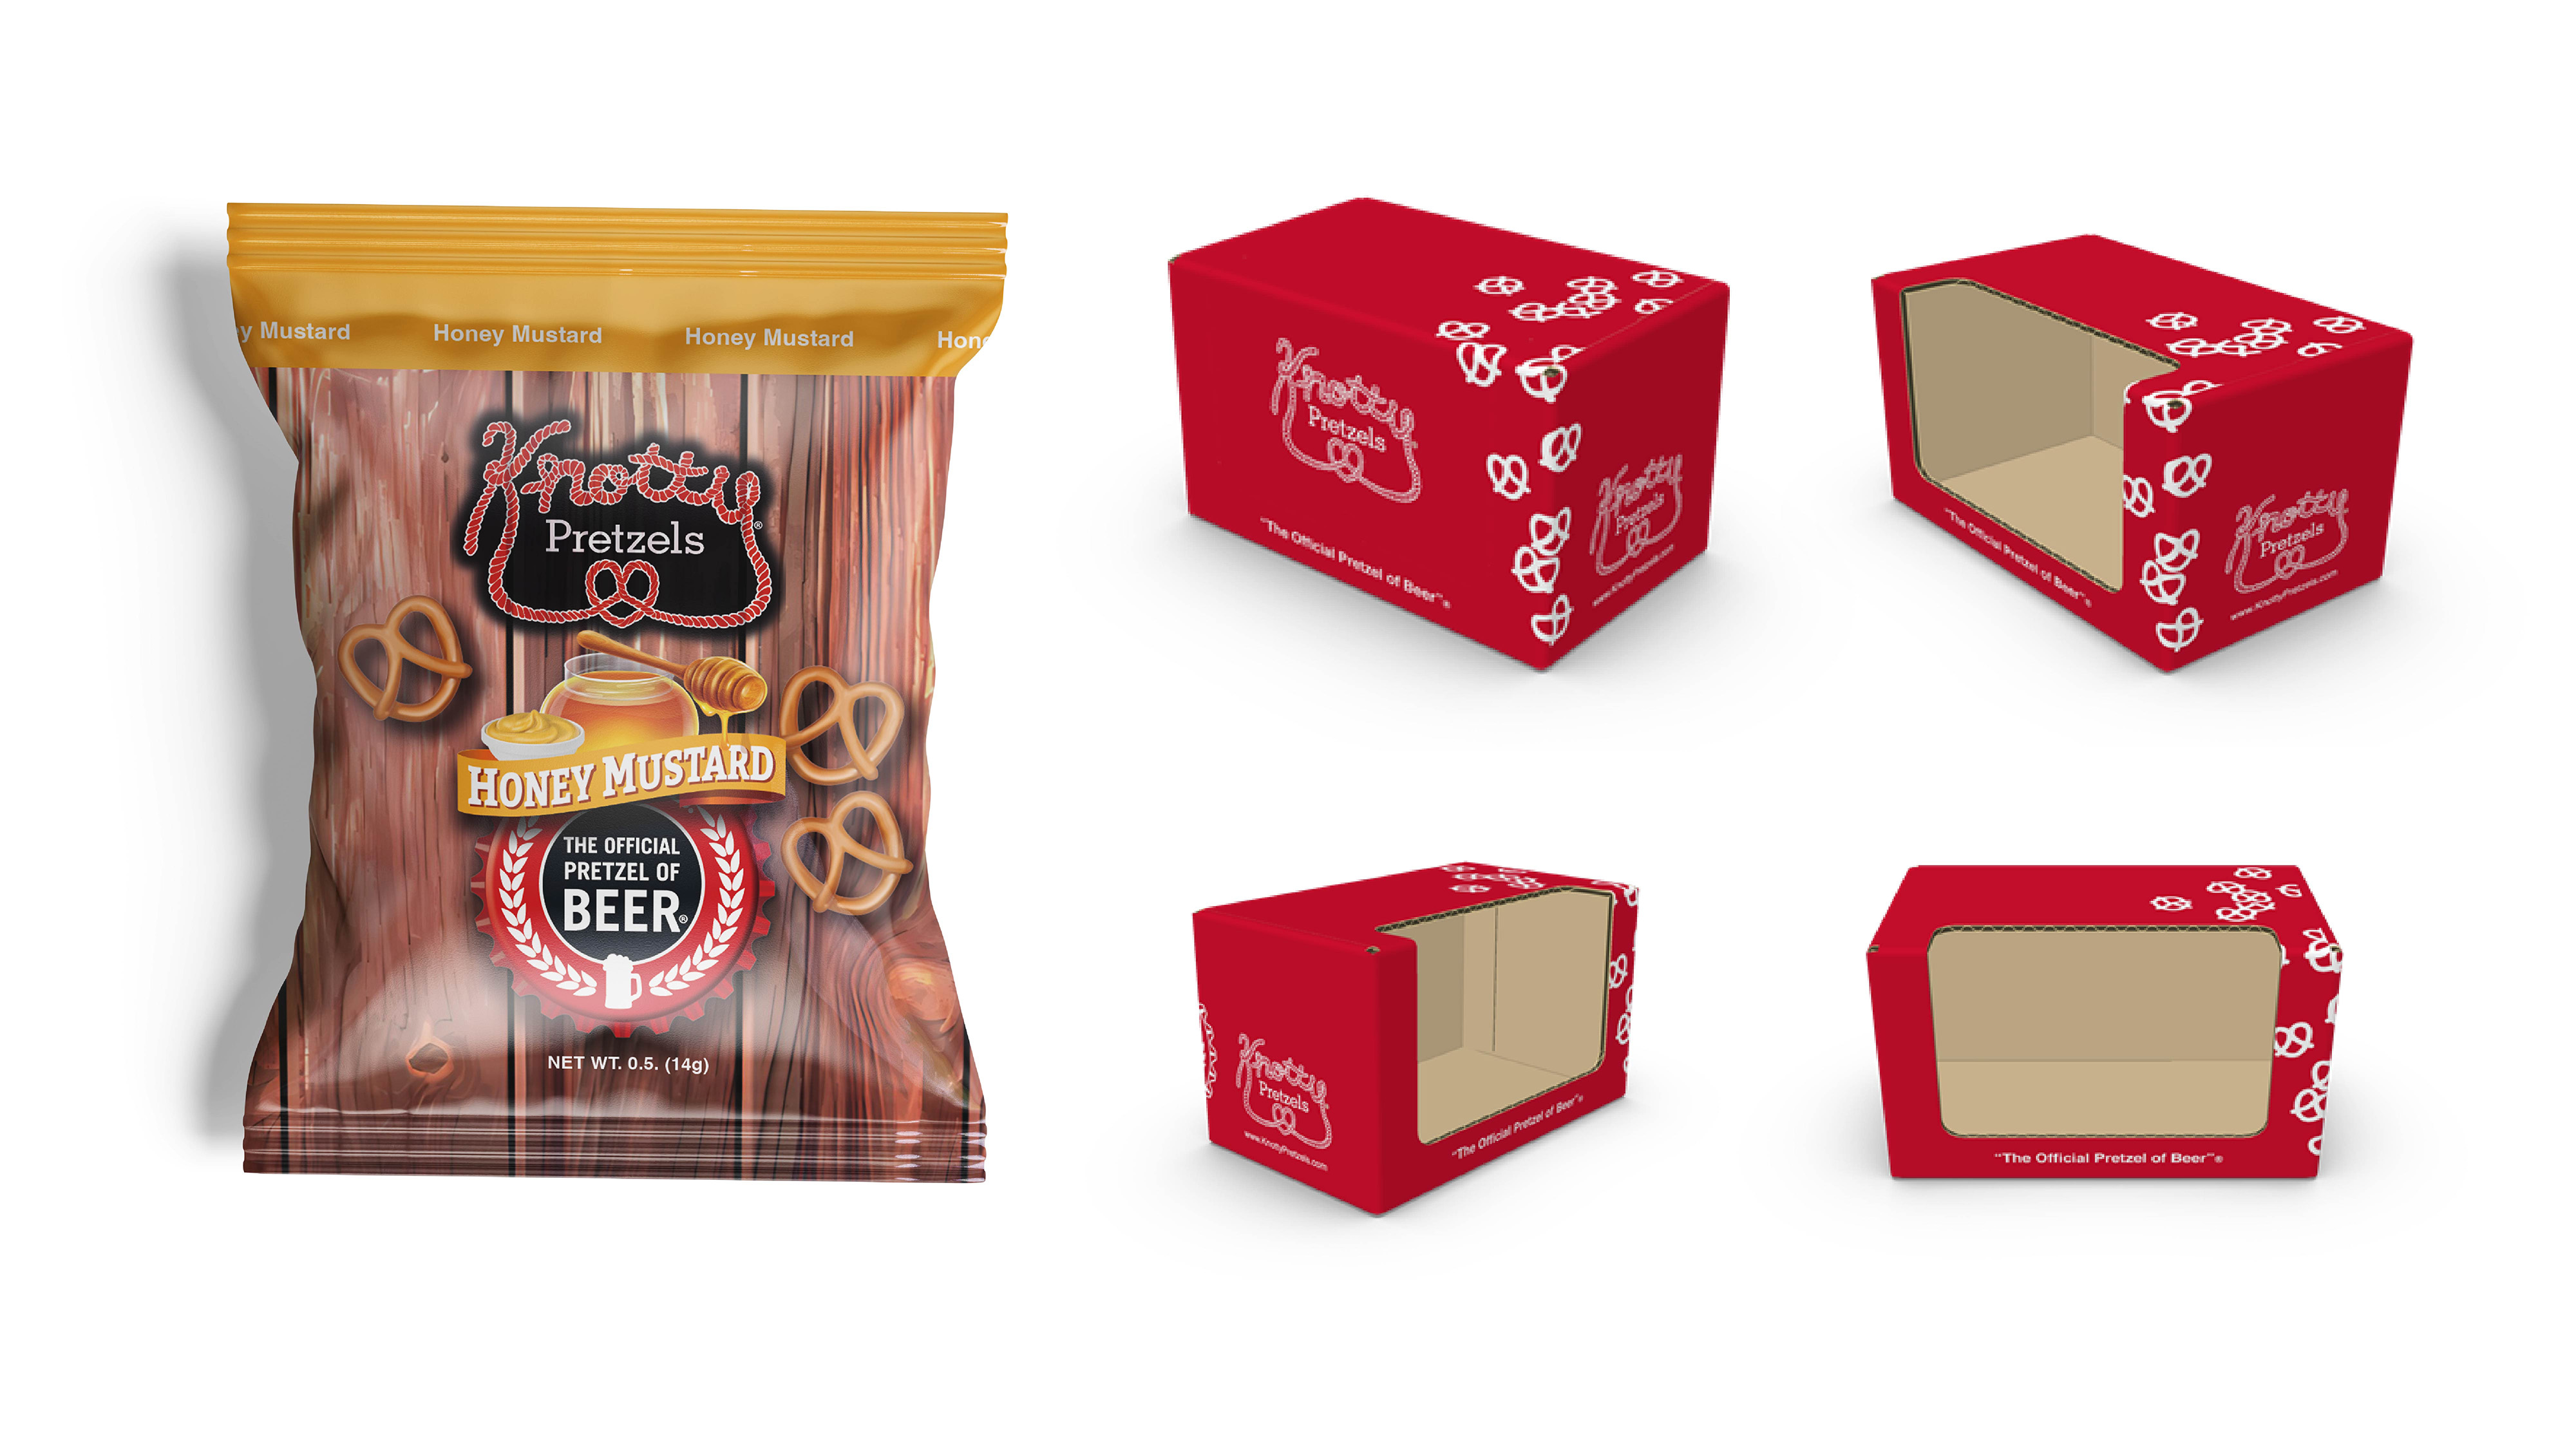 Knotty Pretzels 2.5oz Packaging and Display / "Knotty Pretzels 2.5oz Packaging and Display," display box, 10 x 6 x 6 inches print, 2023. This is the 2.5oz packaging along with the knock-out display box designed and implemented for Knotty Pretzels.